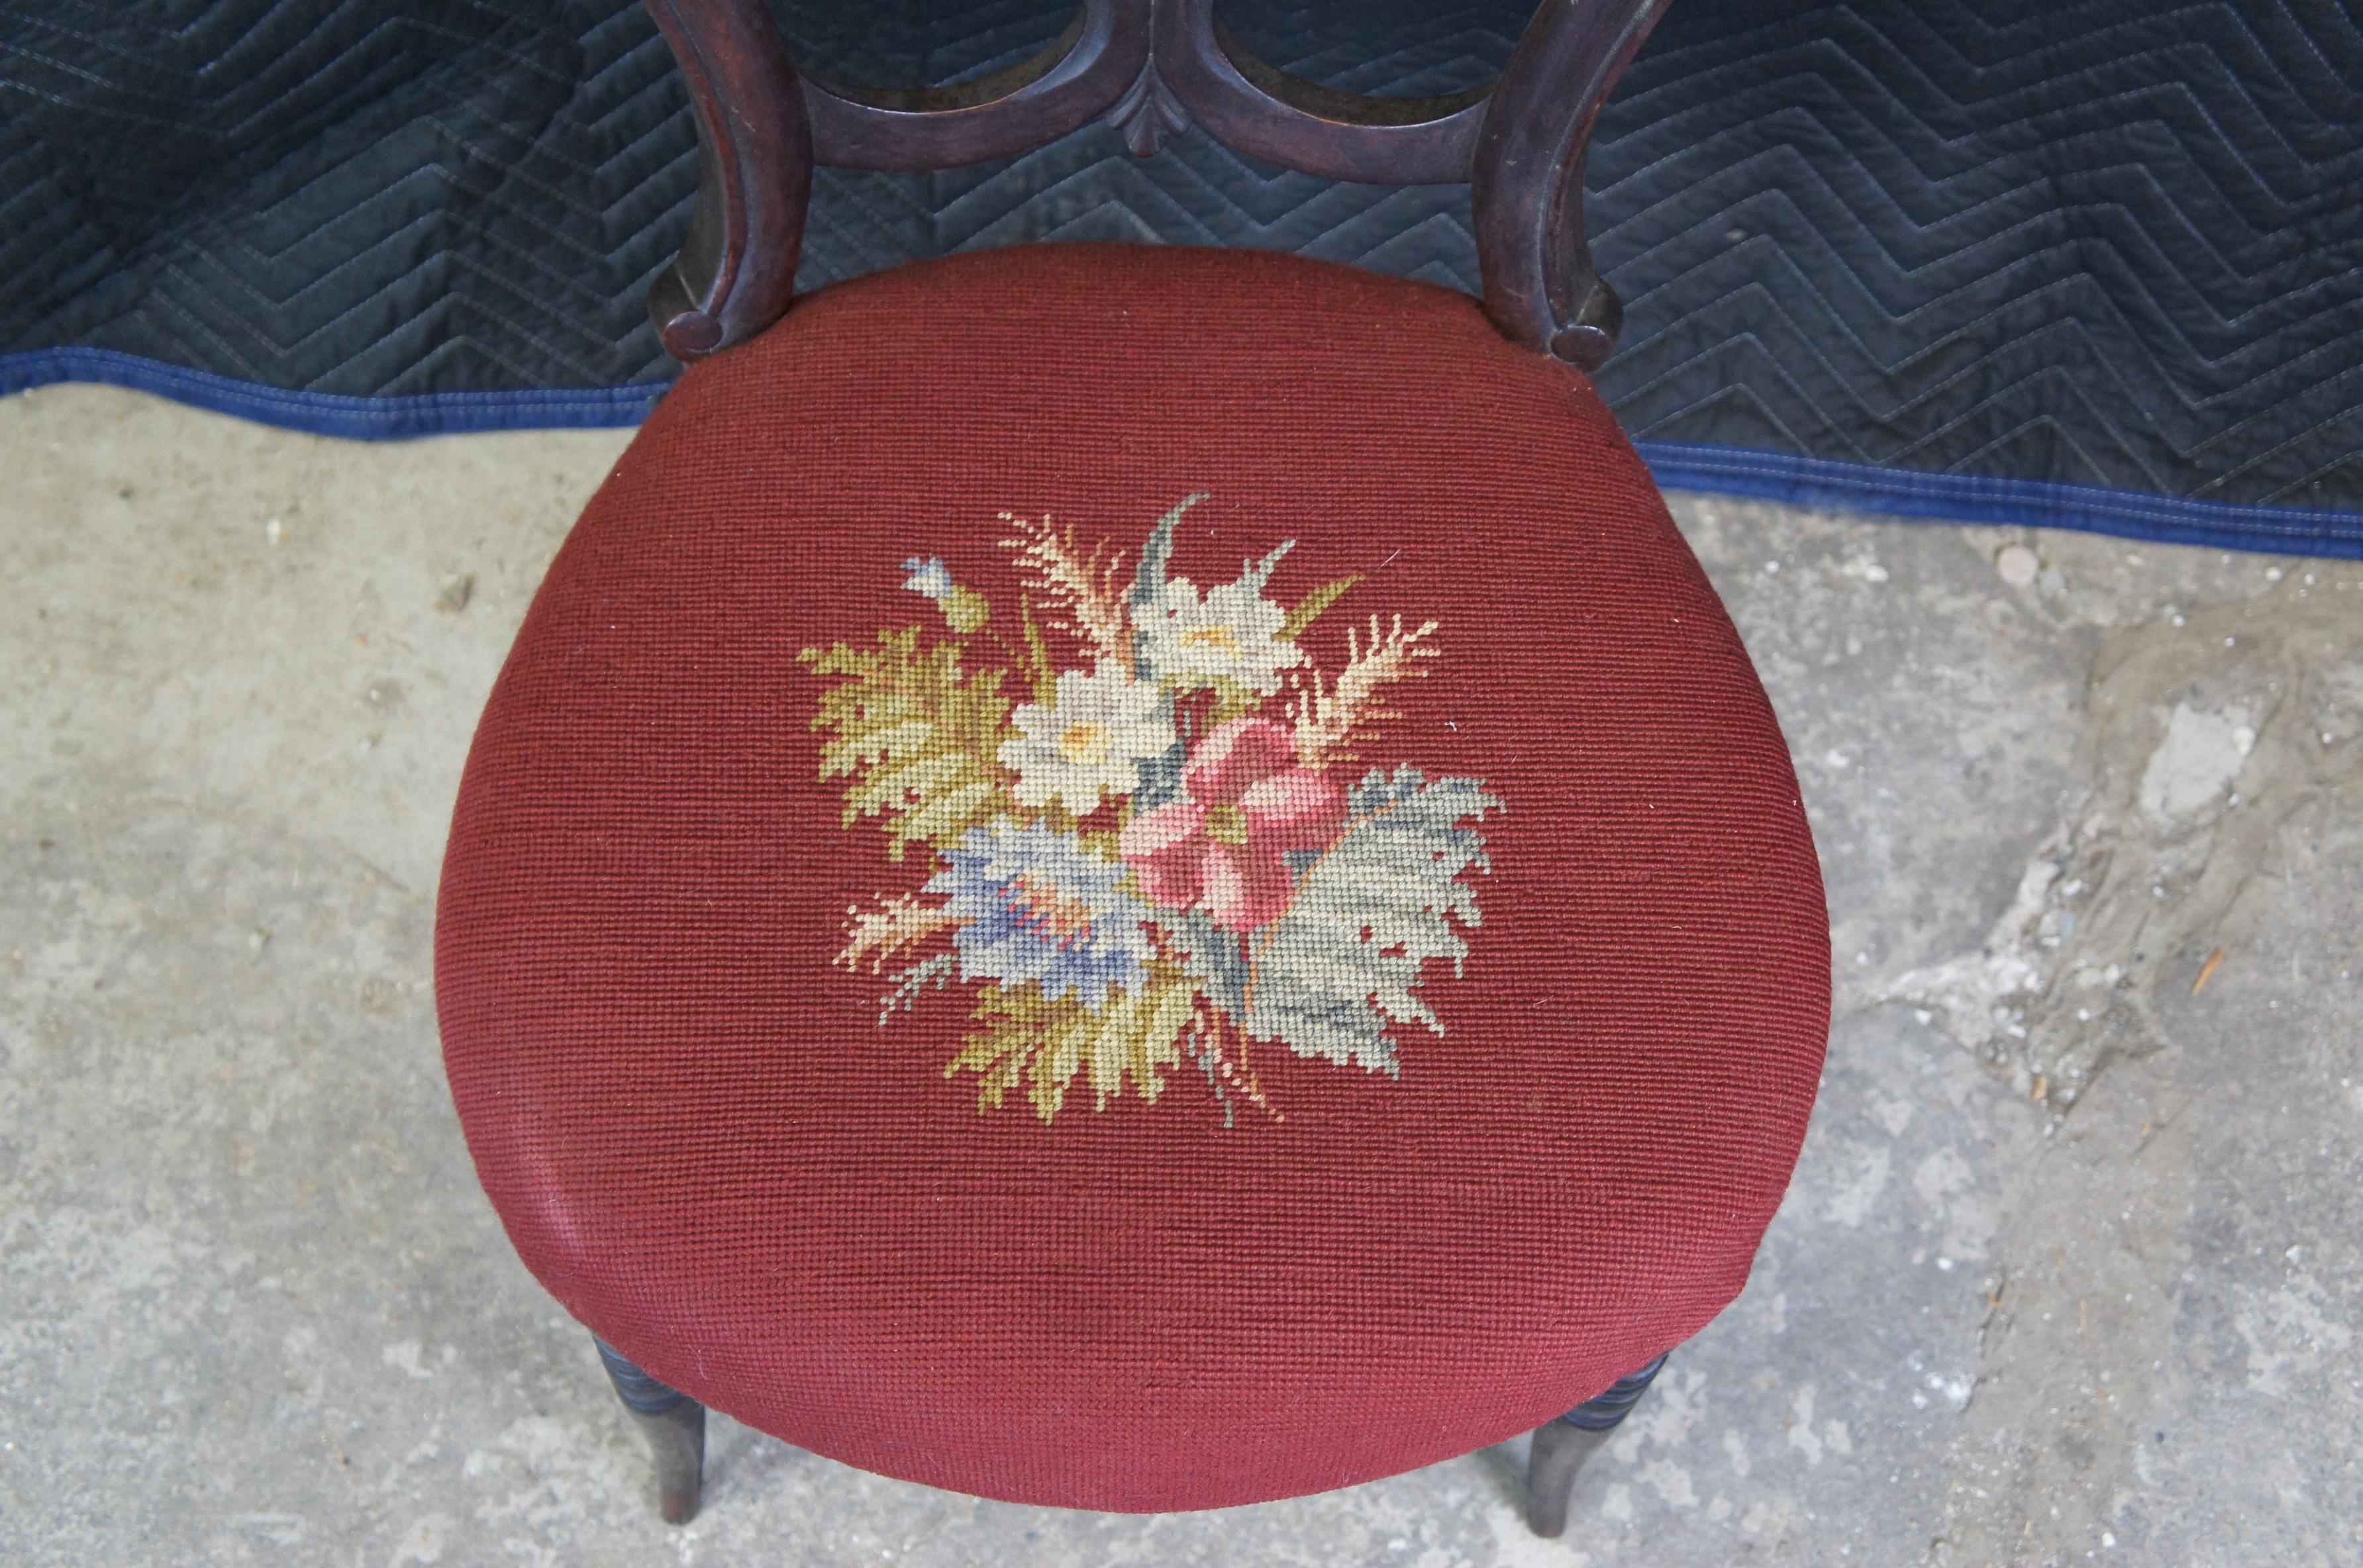 antique needlepoint chair